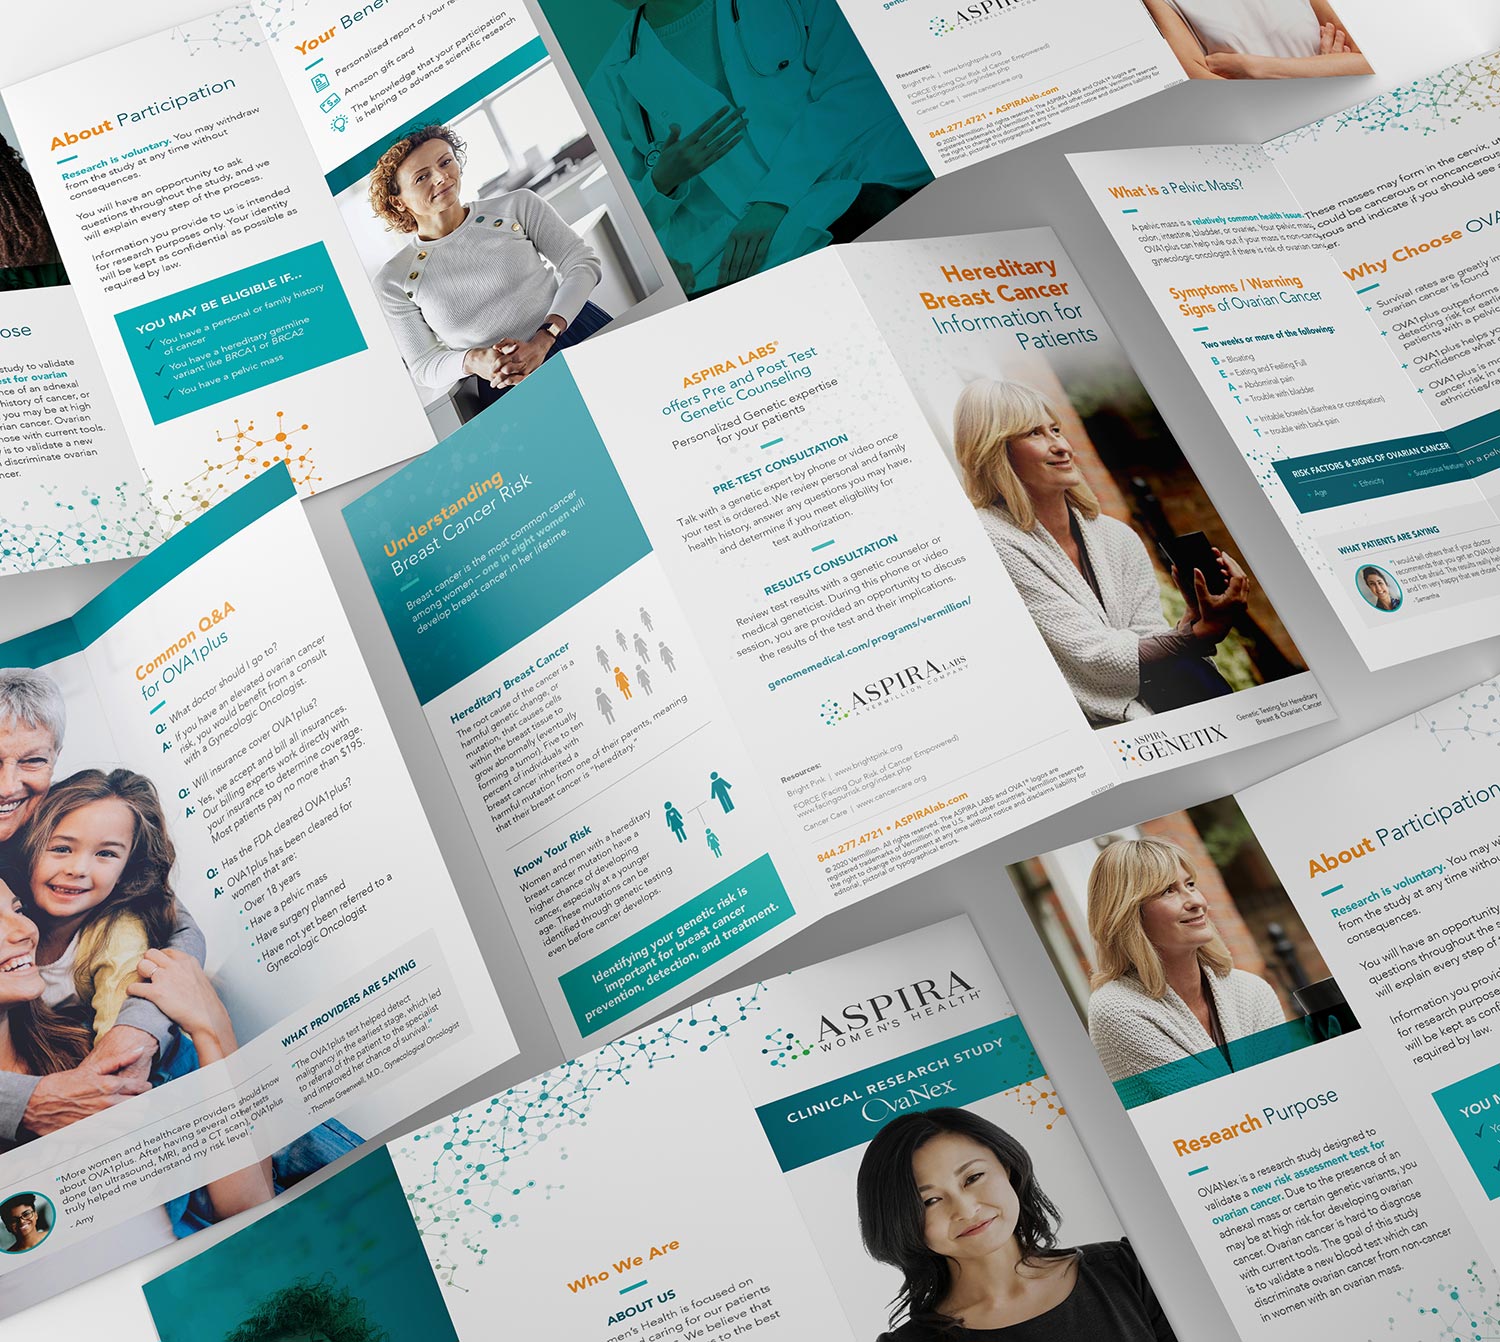 Brochure and Sales Material Designs for Medtech, Biotech And Healthcare Companies